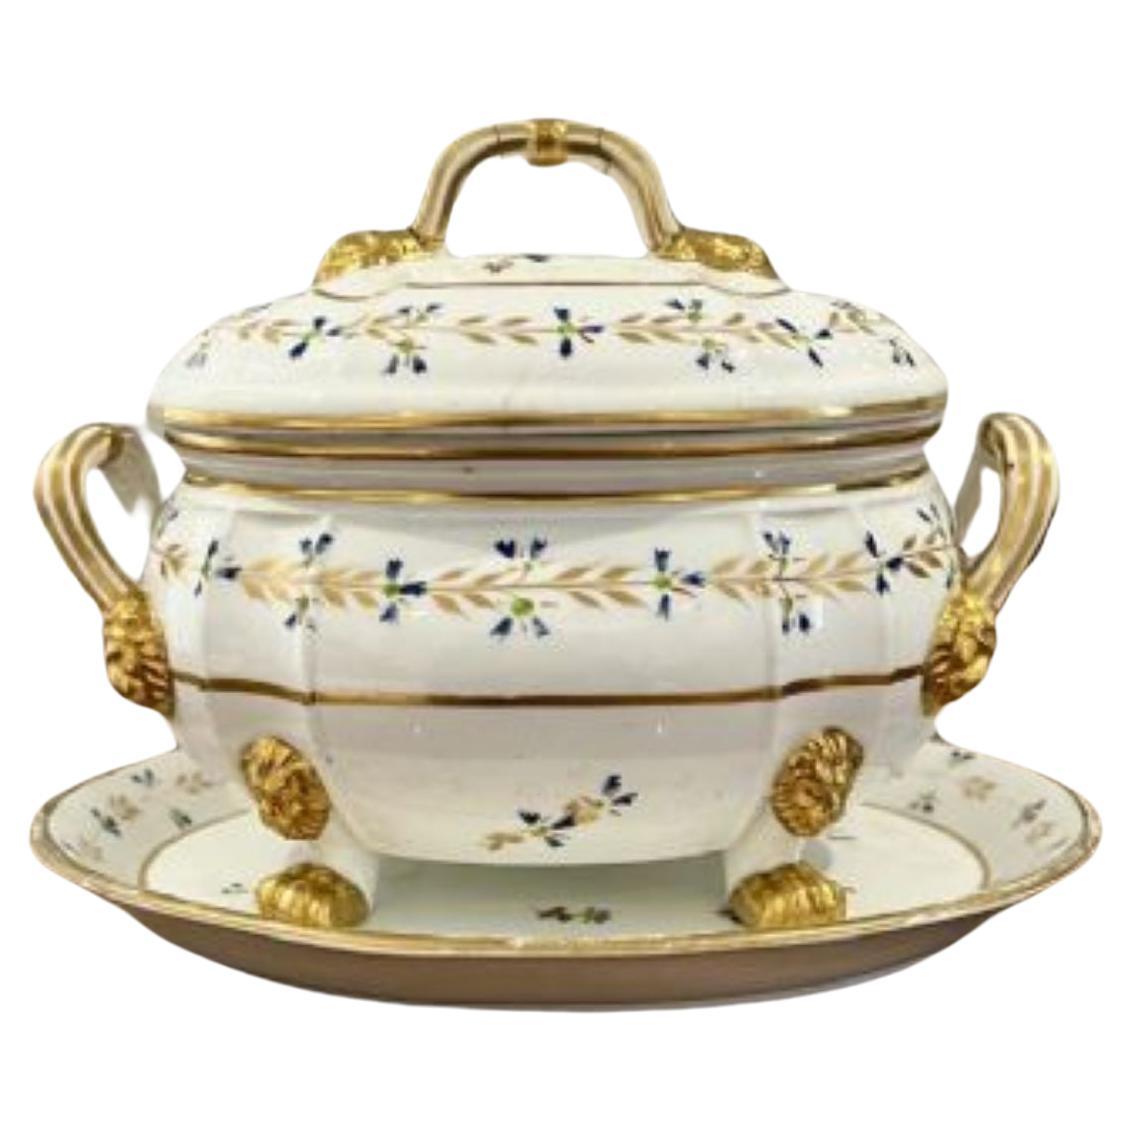 Outstanding quality early 19th century crown derby tureen and cover